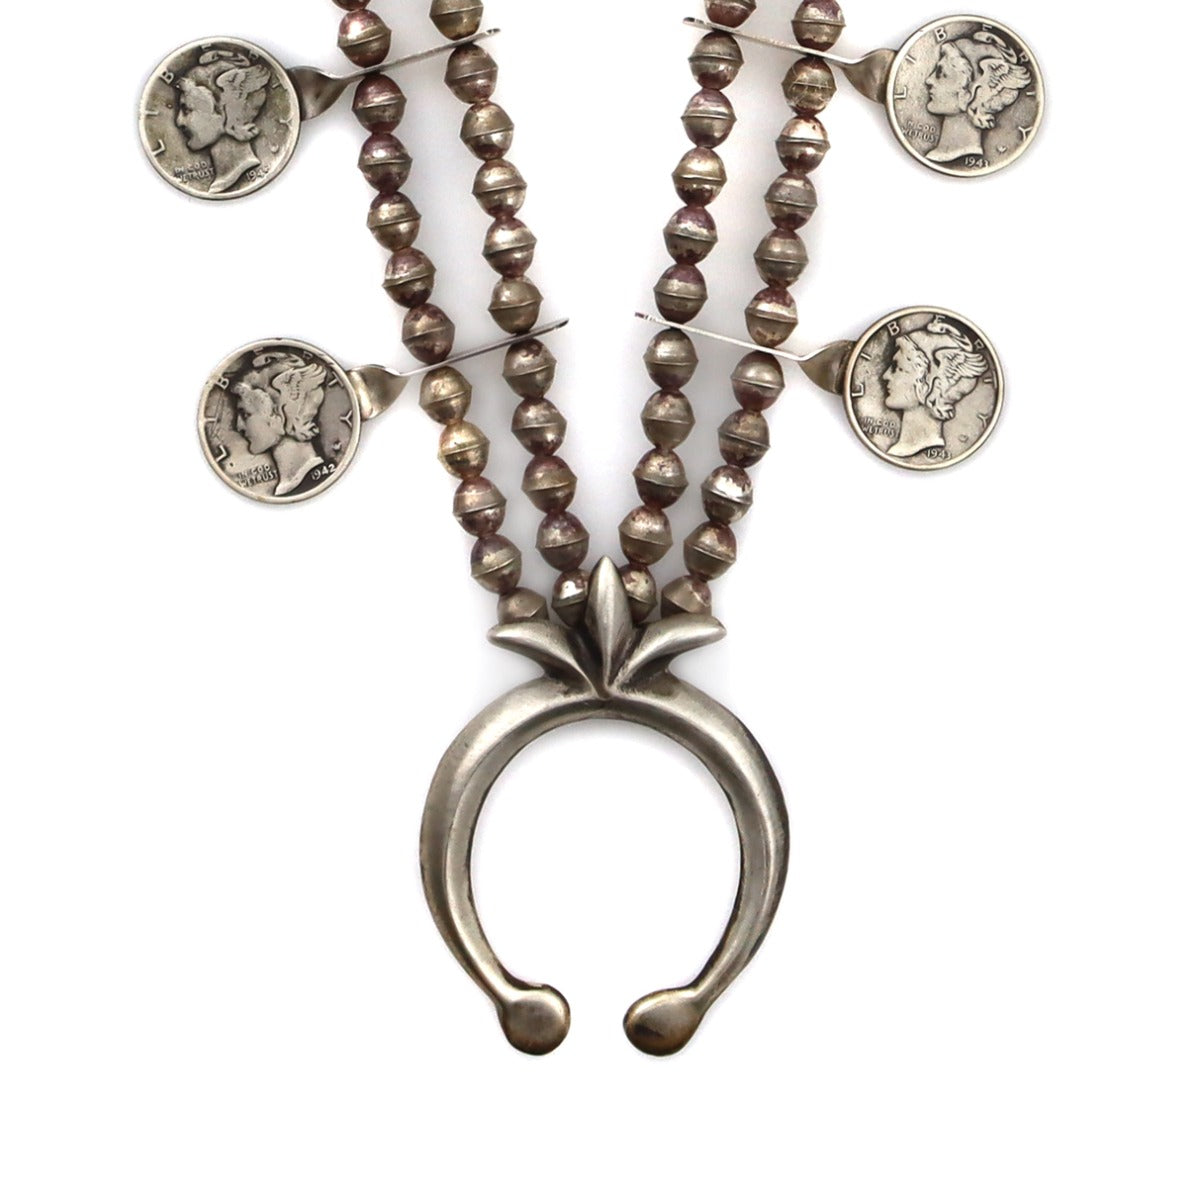 Navajo Silver Necklace with Mercury Dimes c. 1960-70s, 24" length (J91243B-0721-004) 1
